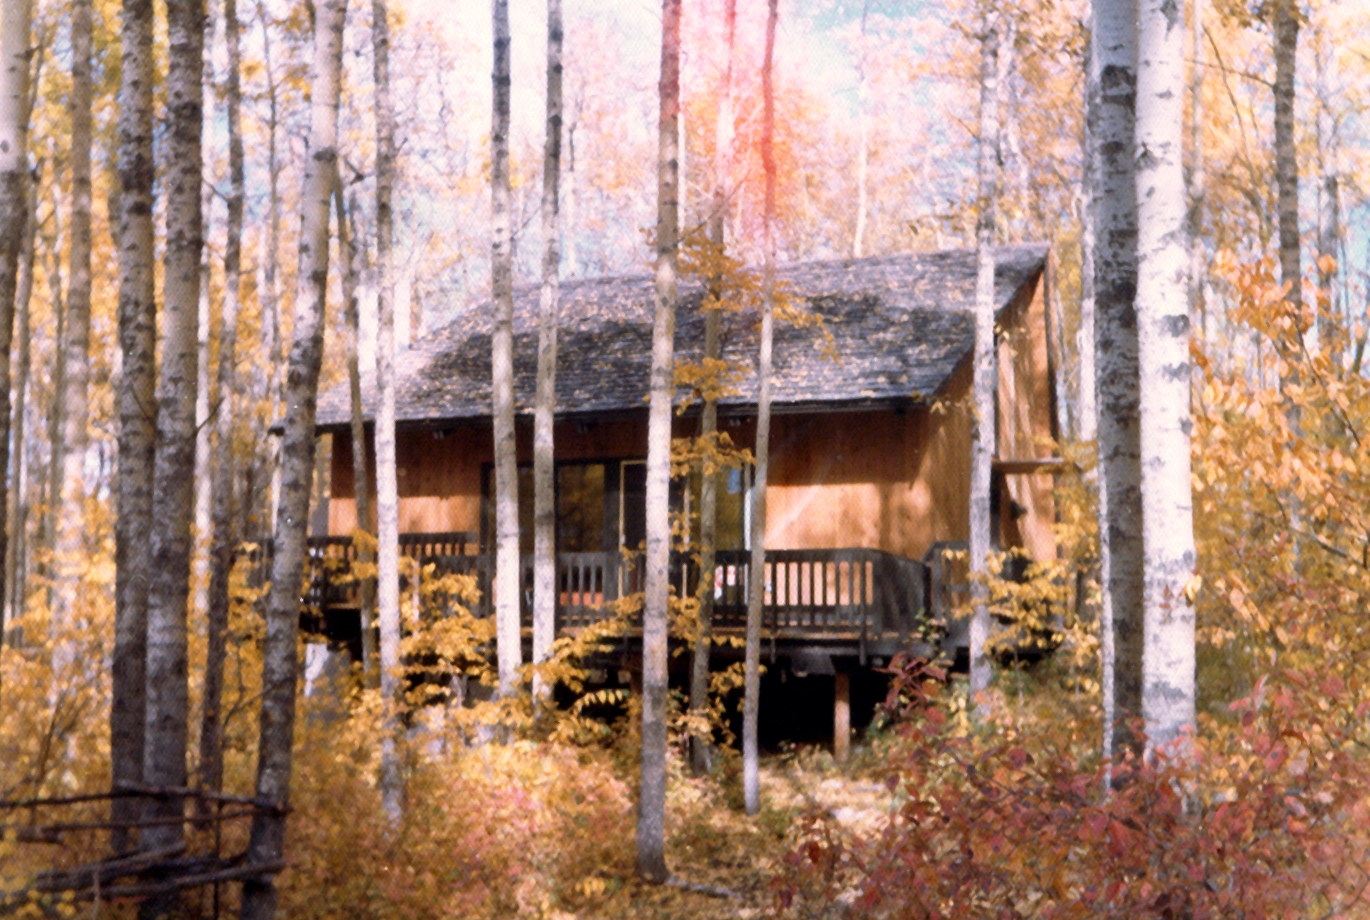 the cabin